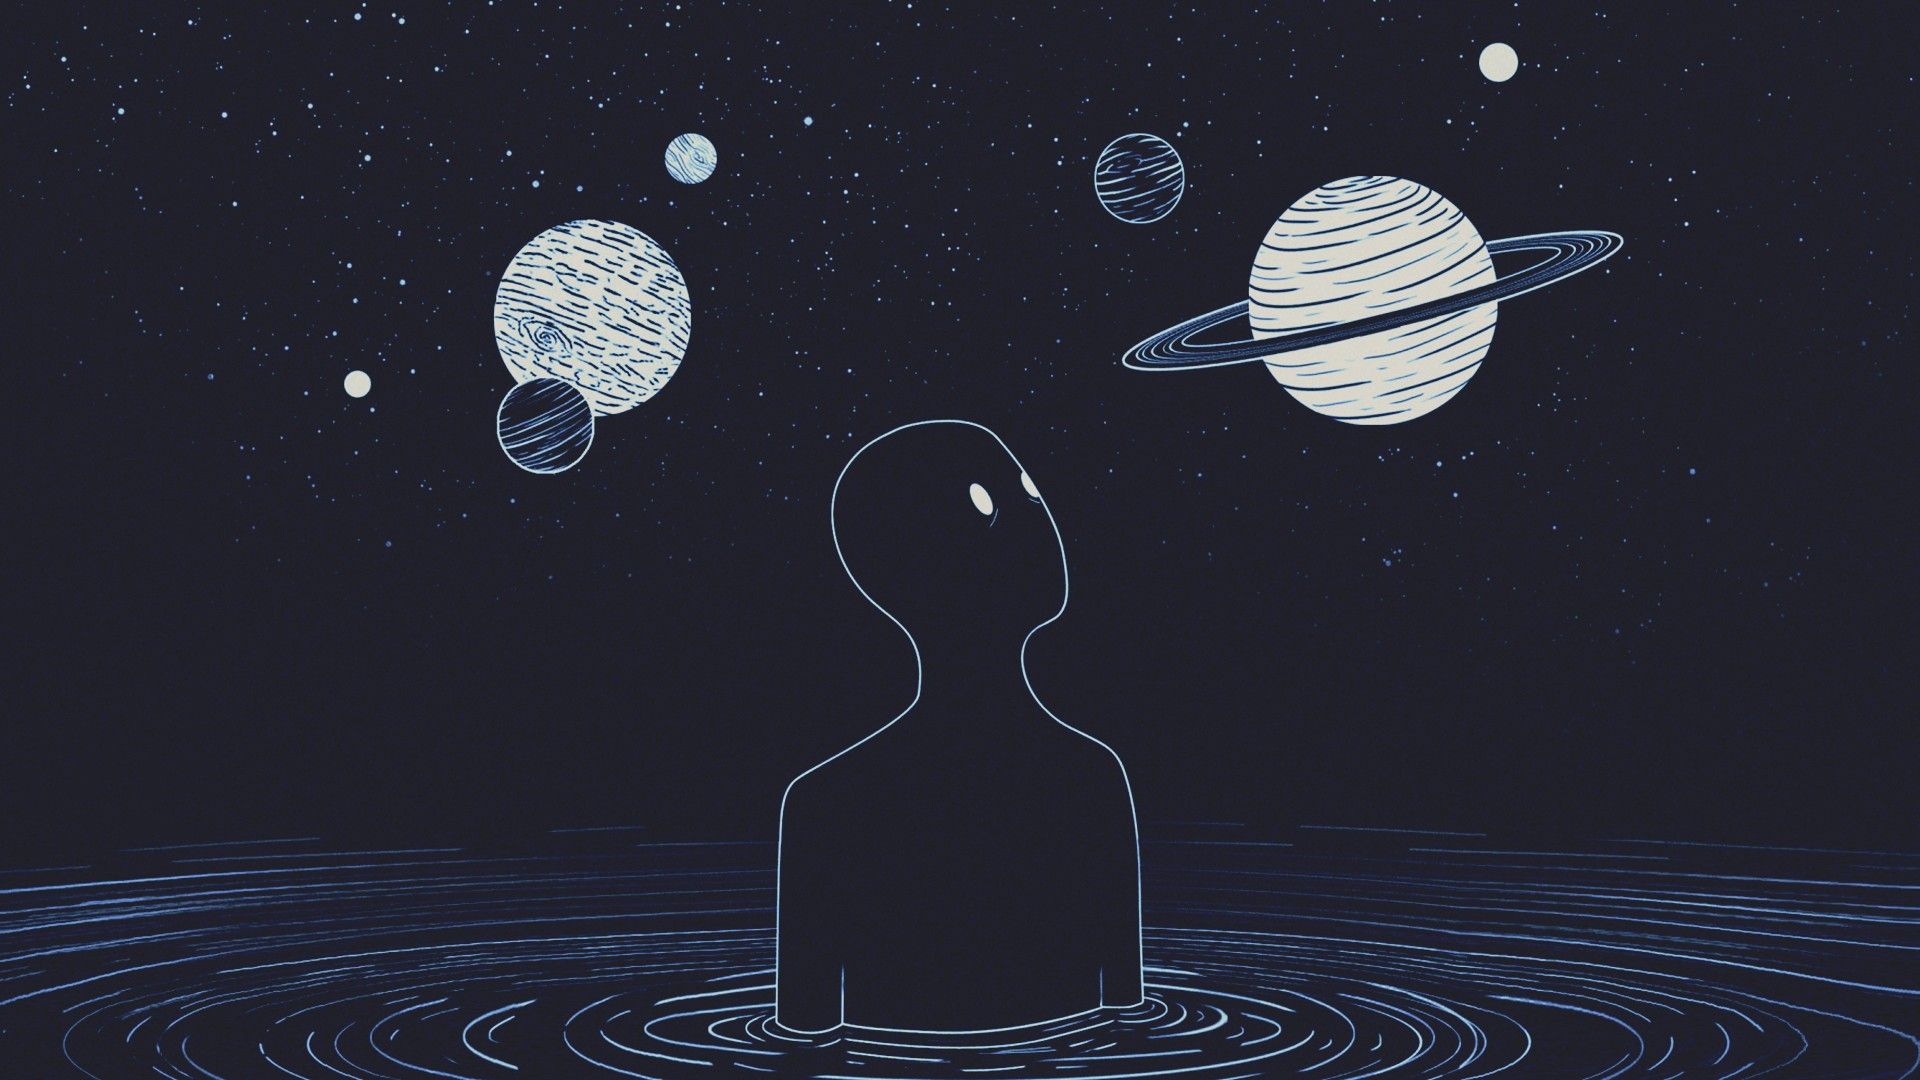 A person standing in water looking up at planets in the night sky - Desktop, 1920x1080, laptop, HD, dark, science, minimalist, space, planet, ghost, witch, moon phases, grunge, alien, computer, illustration